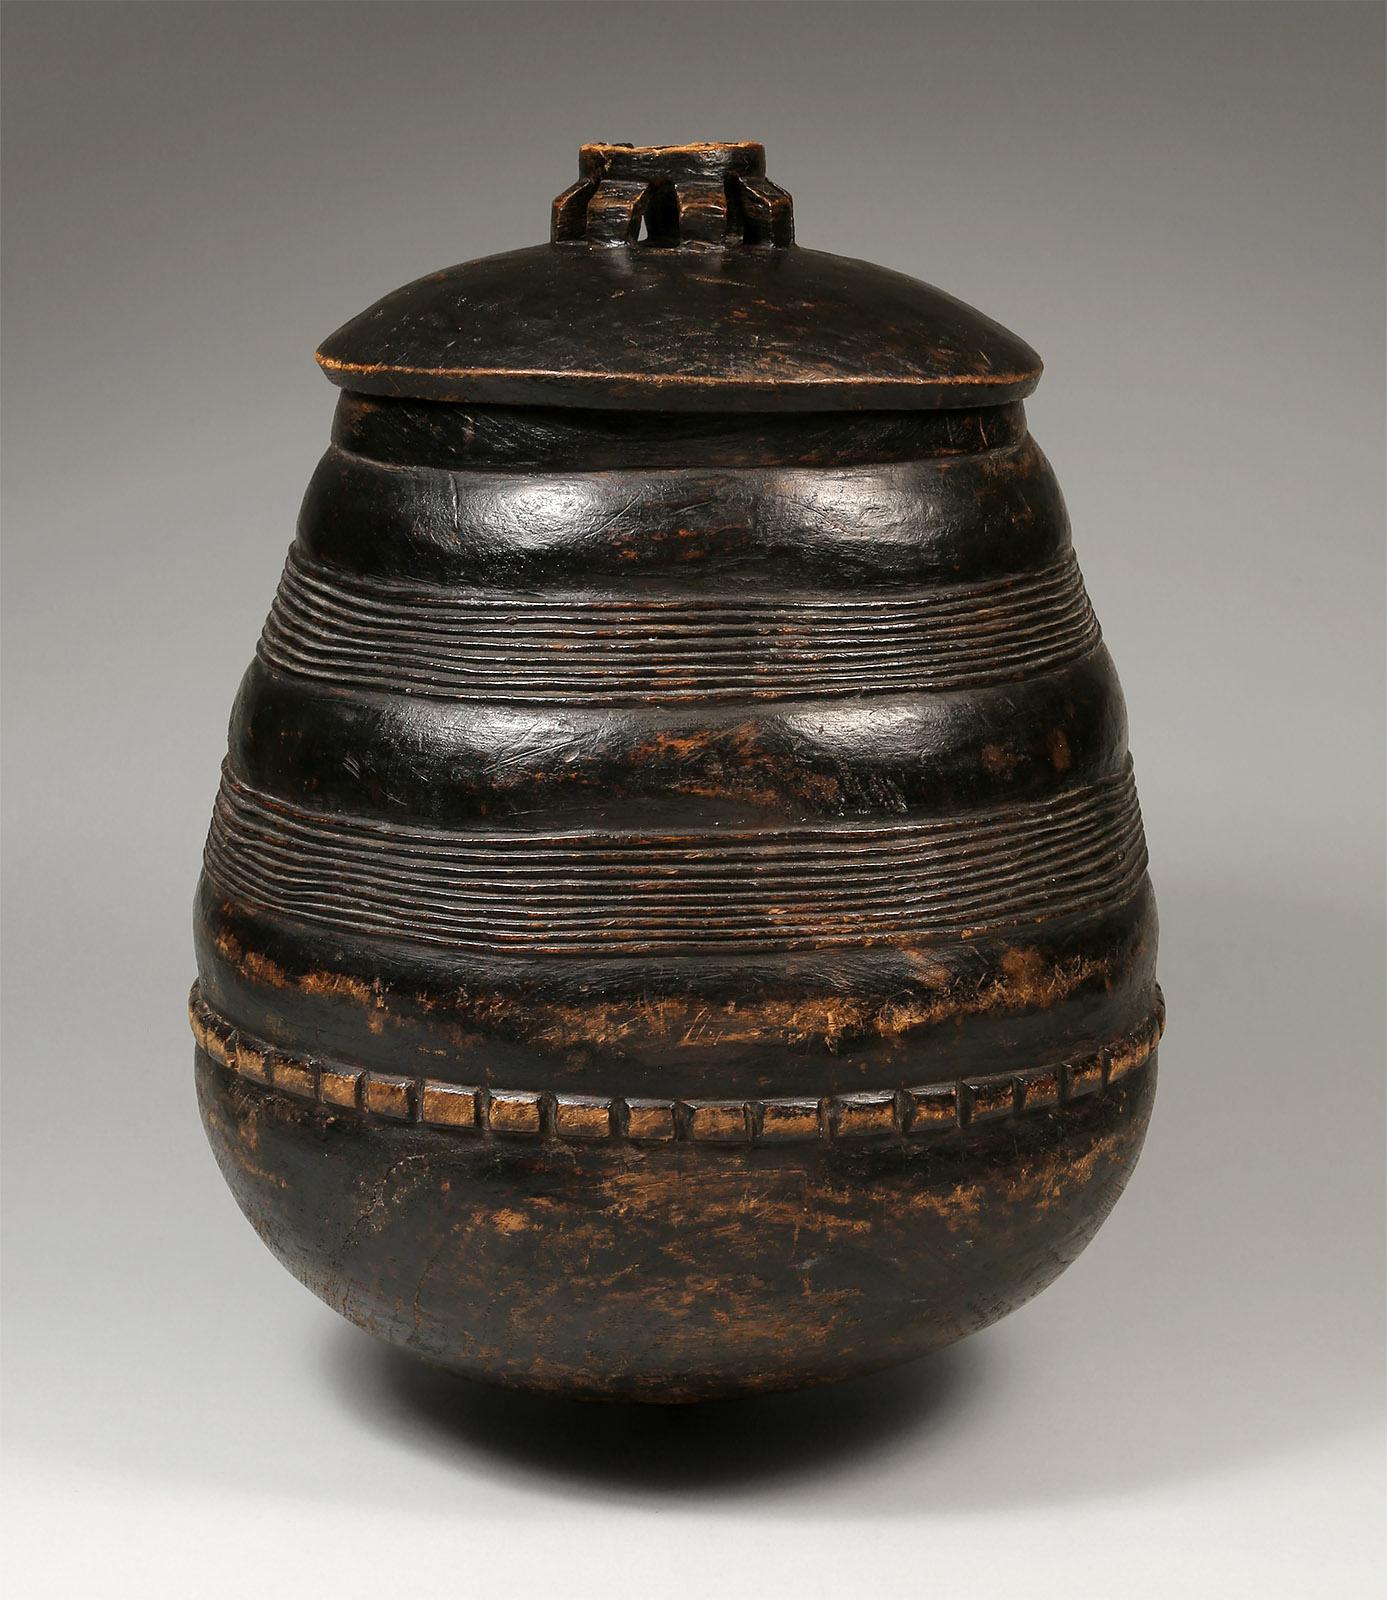 Lozi Wooden Beer Vessel                         
Lozi people, Zambia     
Early 20th century
Carved wood, pigment
H: 16.5 in x W: 11 in x D: 12 in :: 42 cm x 28 cm x 30.5 cm

An elegantly shaped wooden vessel with two rows of incised linear patterns